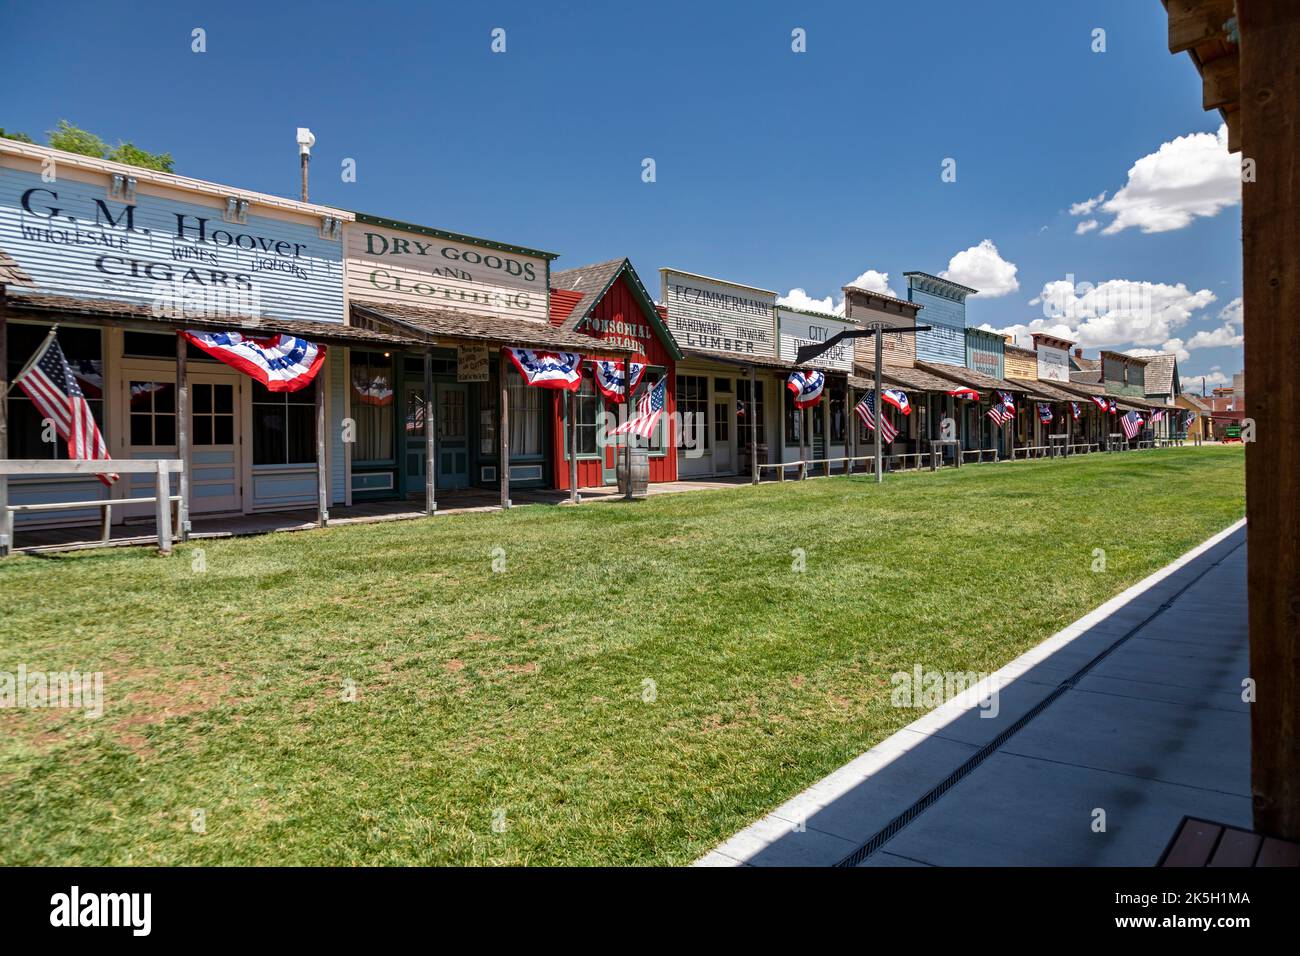 https://c8.alamy.com/comp/2K5H1MA/dodge-city-kansas-boot-hill-museum-decorated-for-a-july-4th-celebration-the-museum-preserves-the-history-and-culture-of-the-old-west-located-on-2K5H1MA.jpg